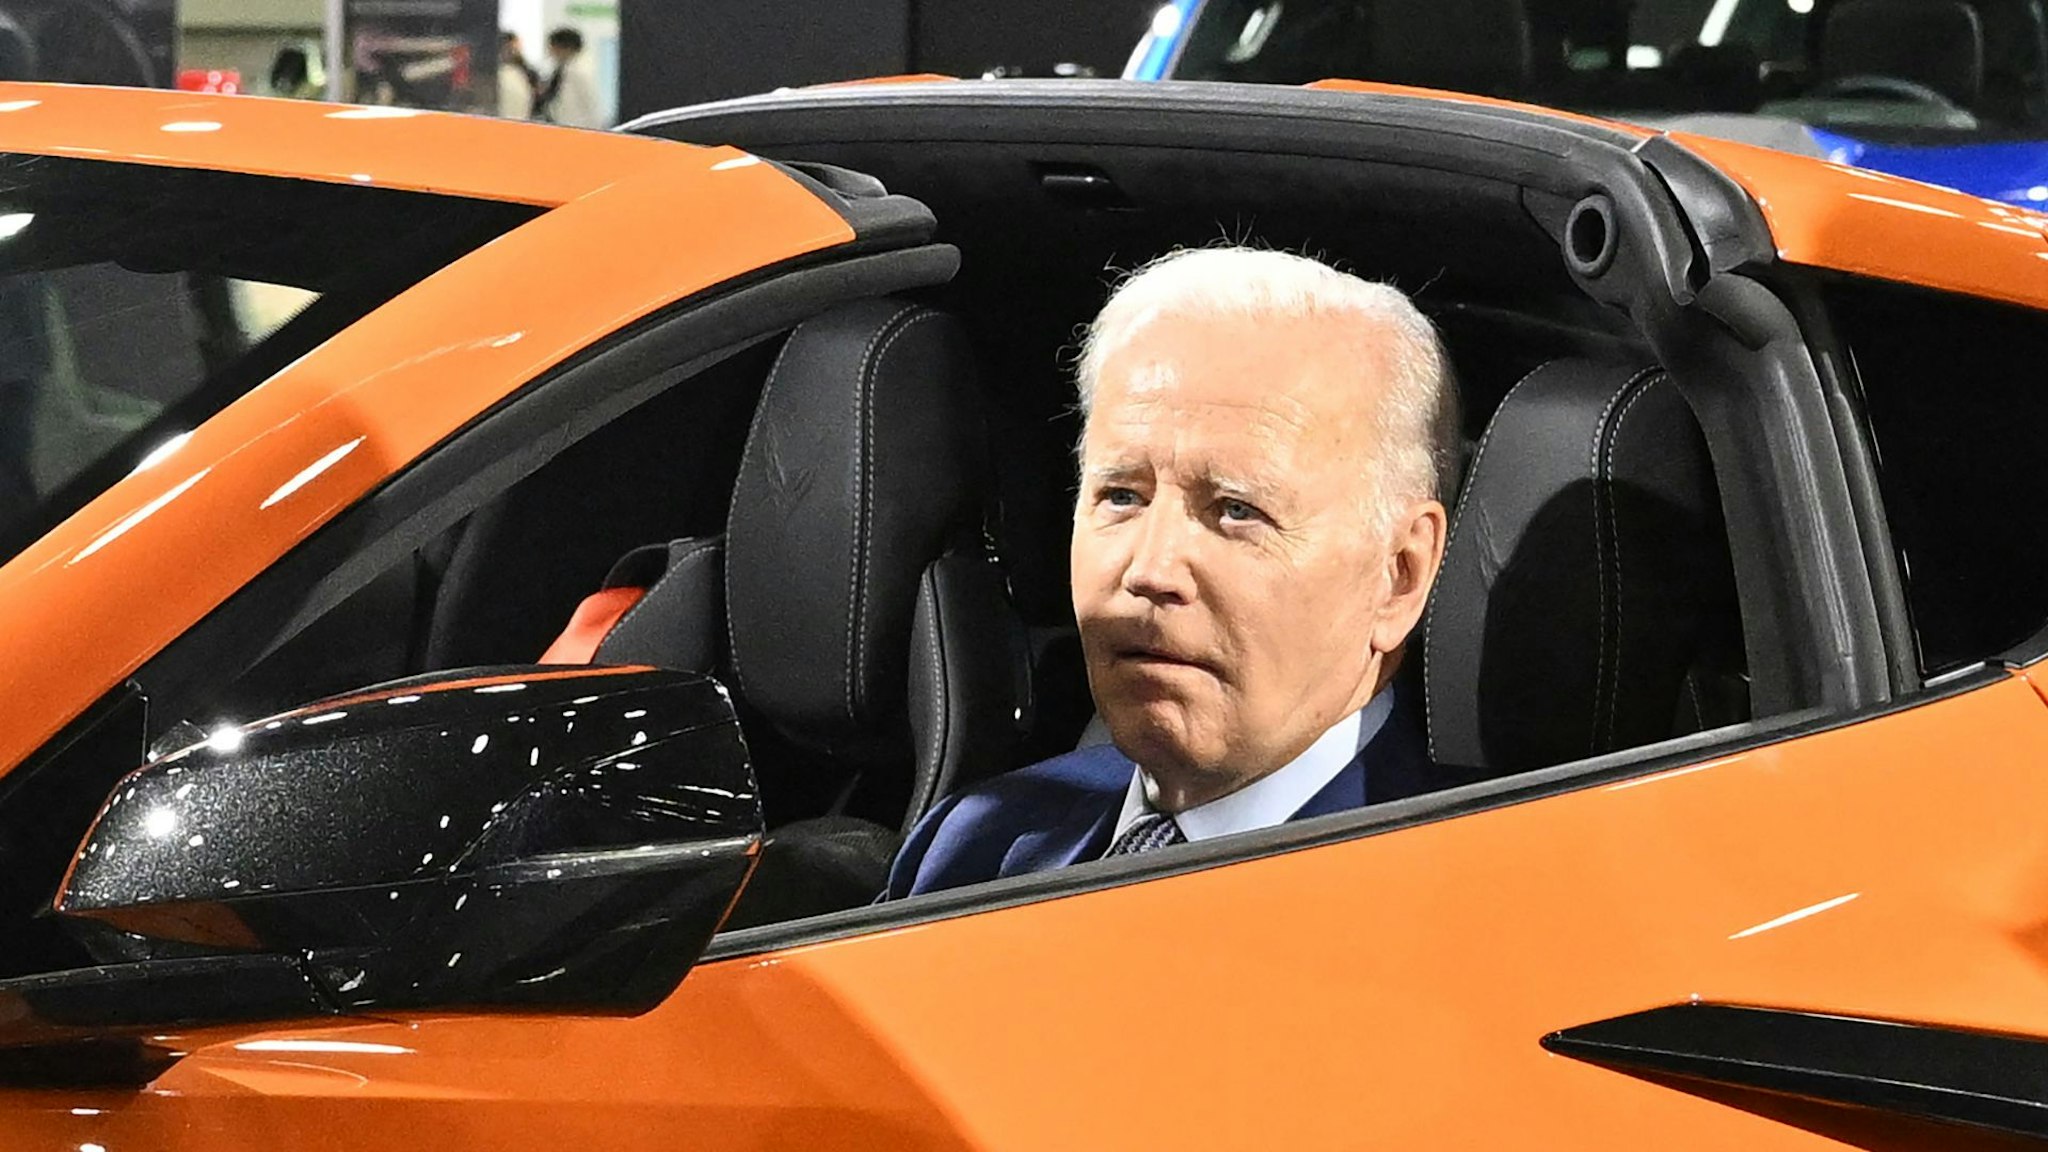 US President Joe Biden sits in a Chevrolet Corvette Z06 as he tours the 2022 North American International Auto Show at Huntington Place Convention Center in Detroit, Michigan on September 14, 2022.